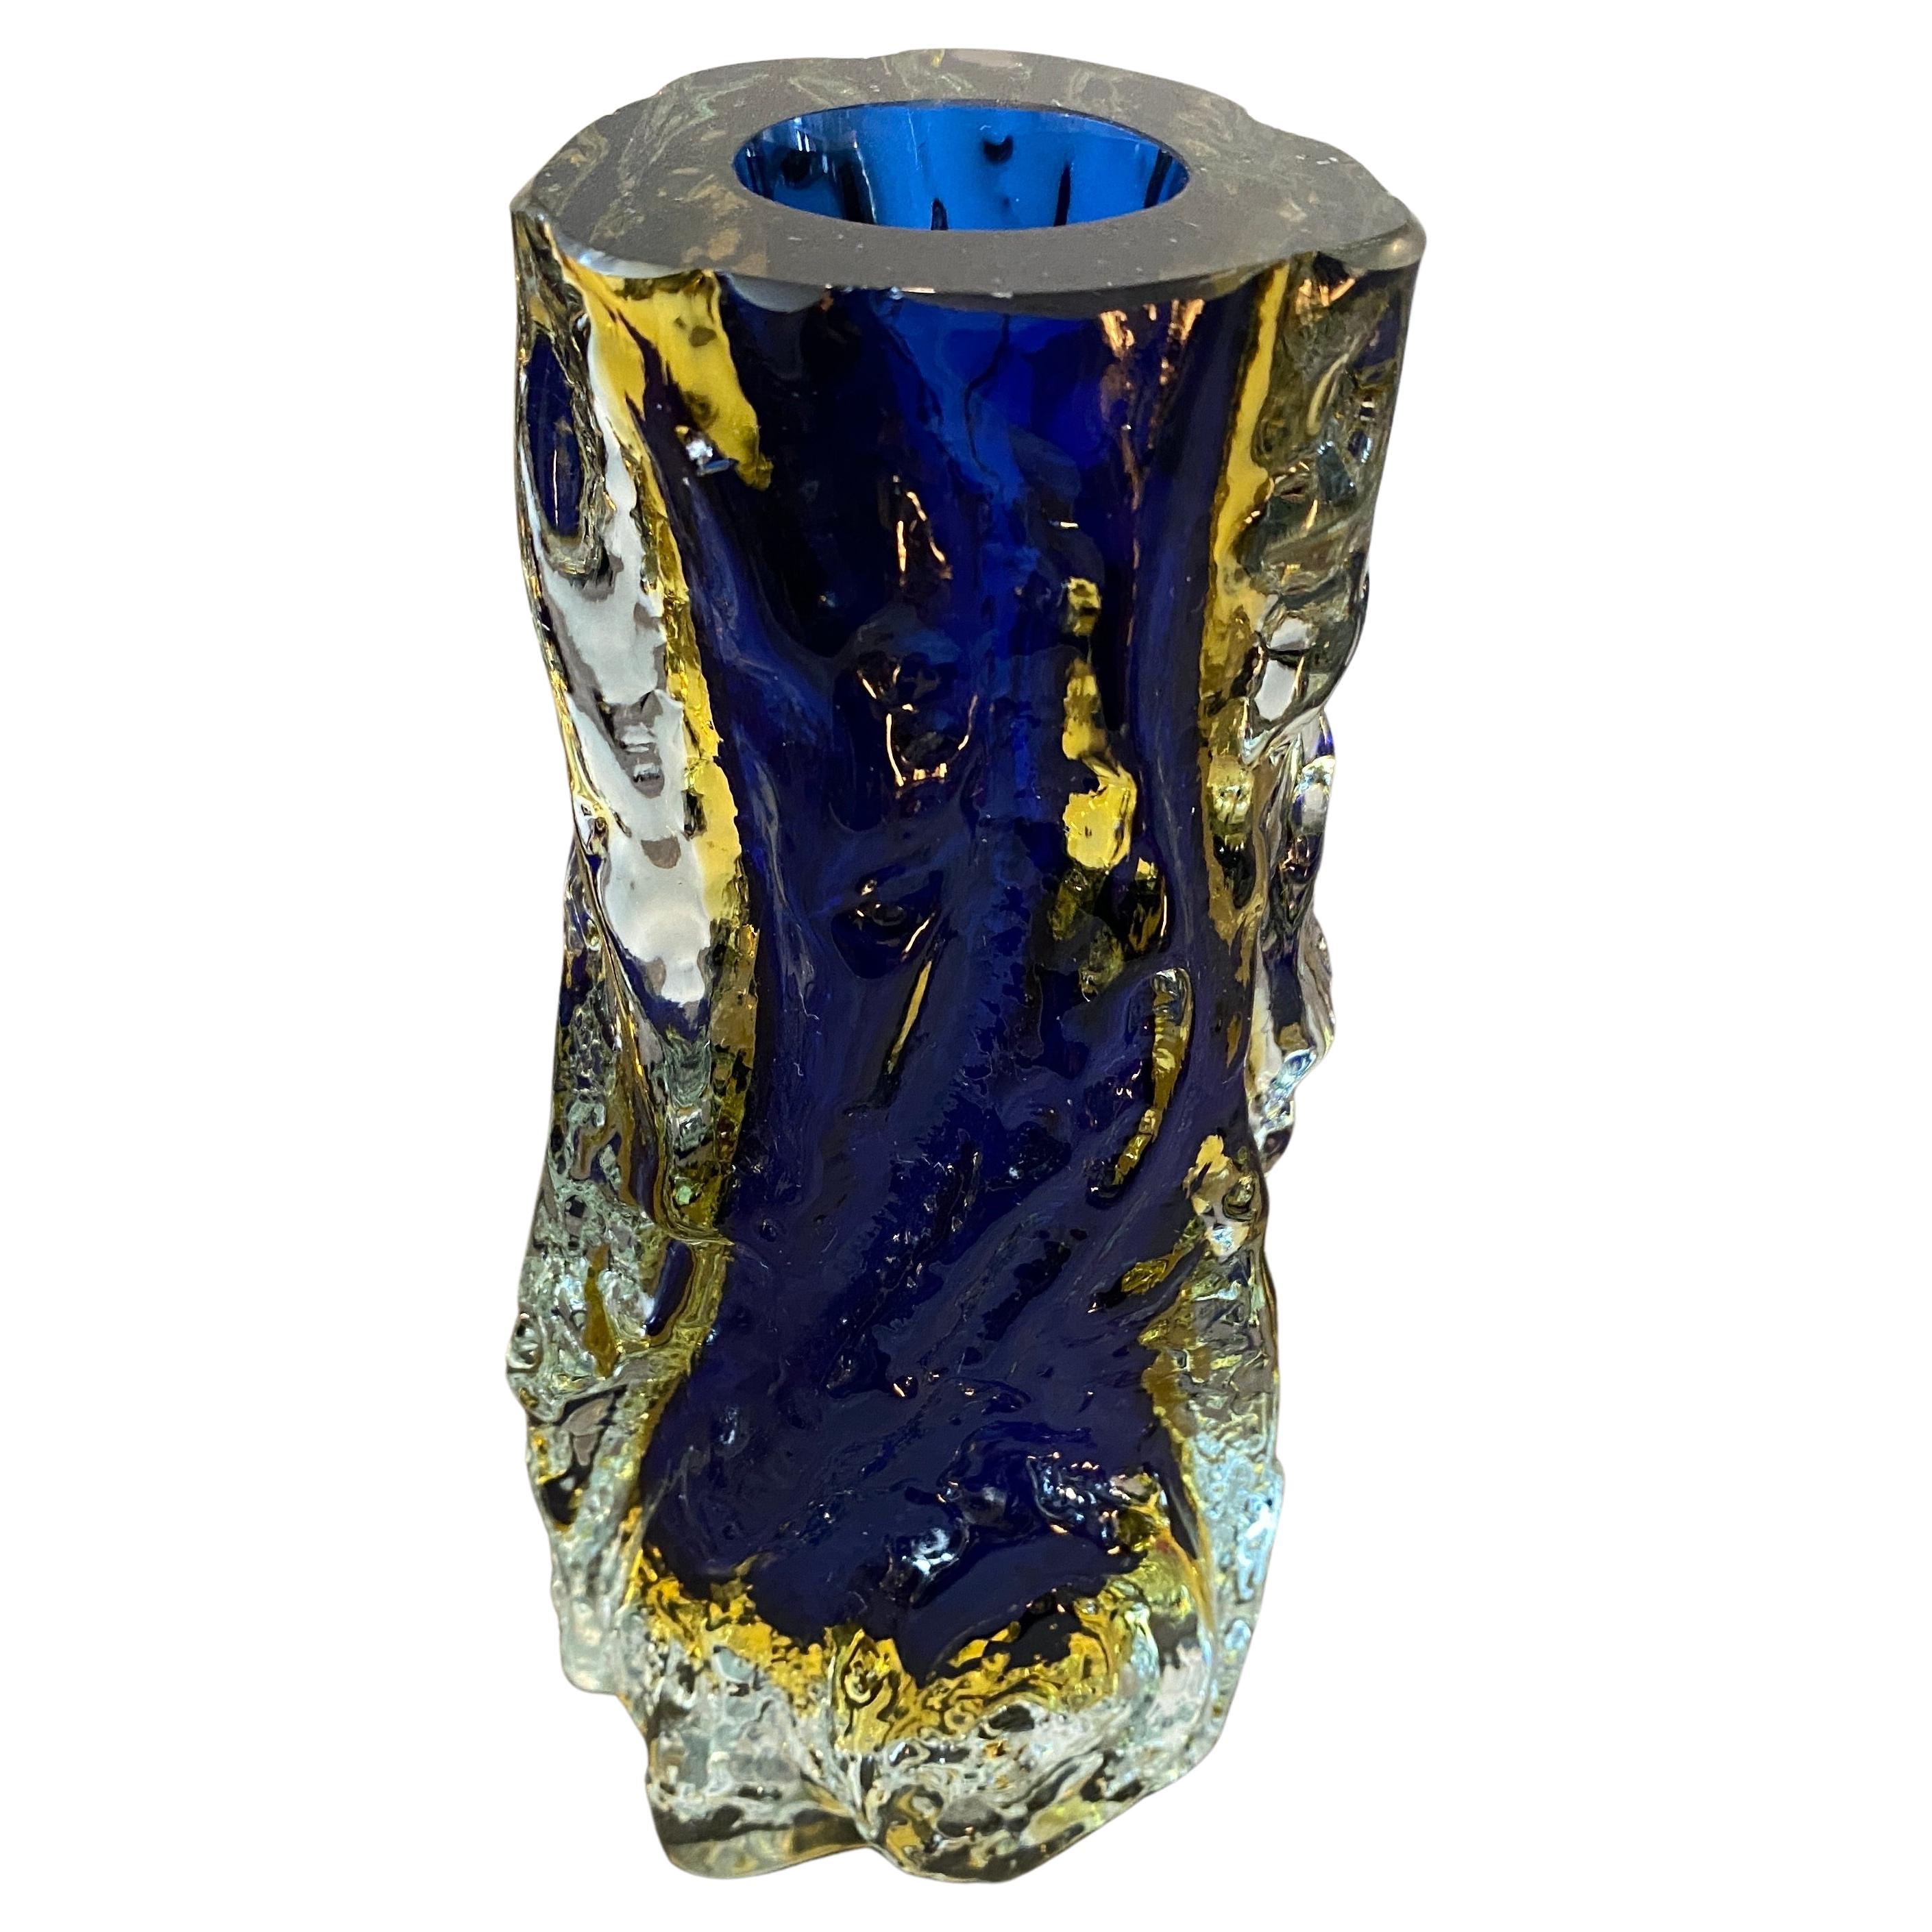 A murano glass vase designed and manufactured in Venice by Mandruzzato in the Seventies. The blue and yellow sommerso murano glass it's in perfect conditions as you can see on the all pictures.